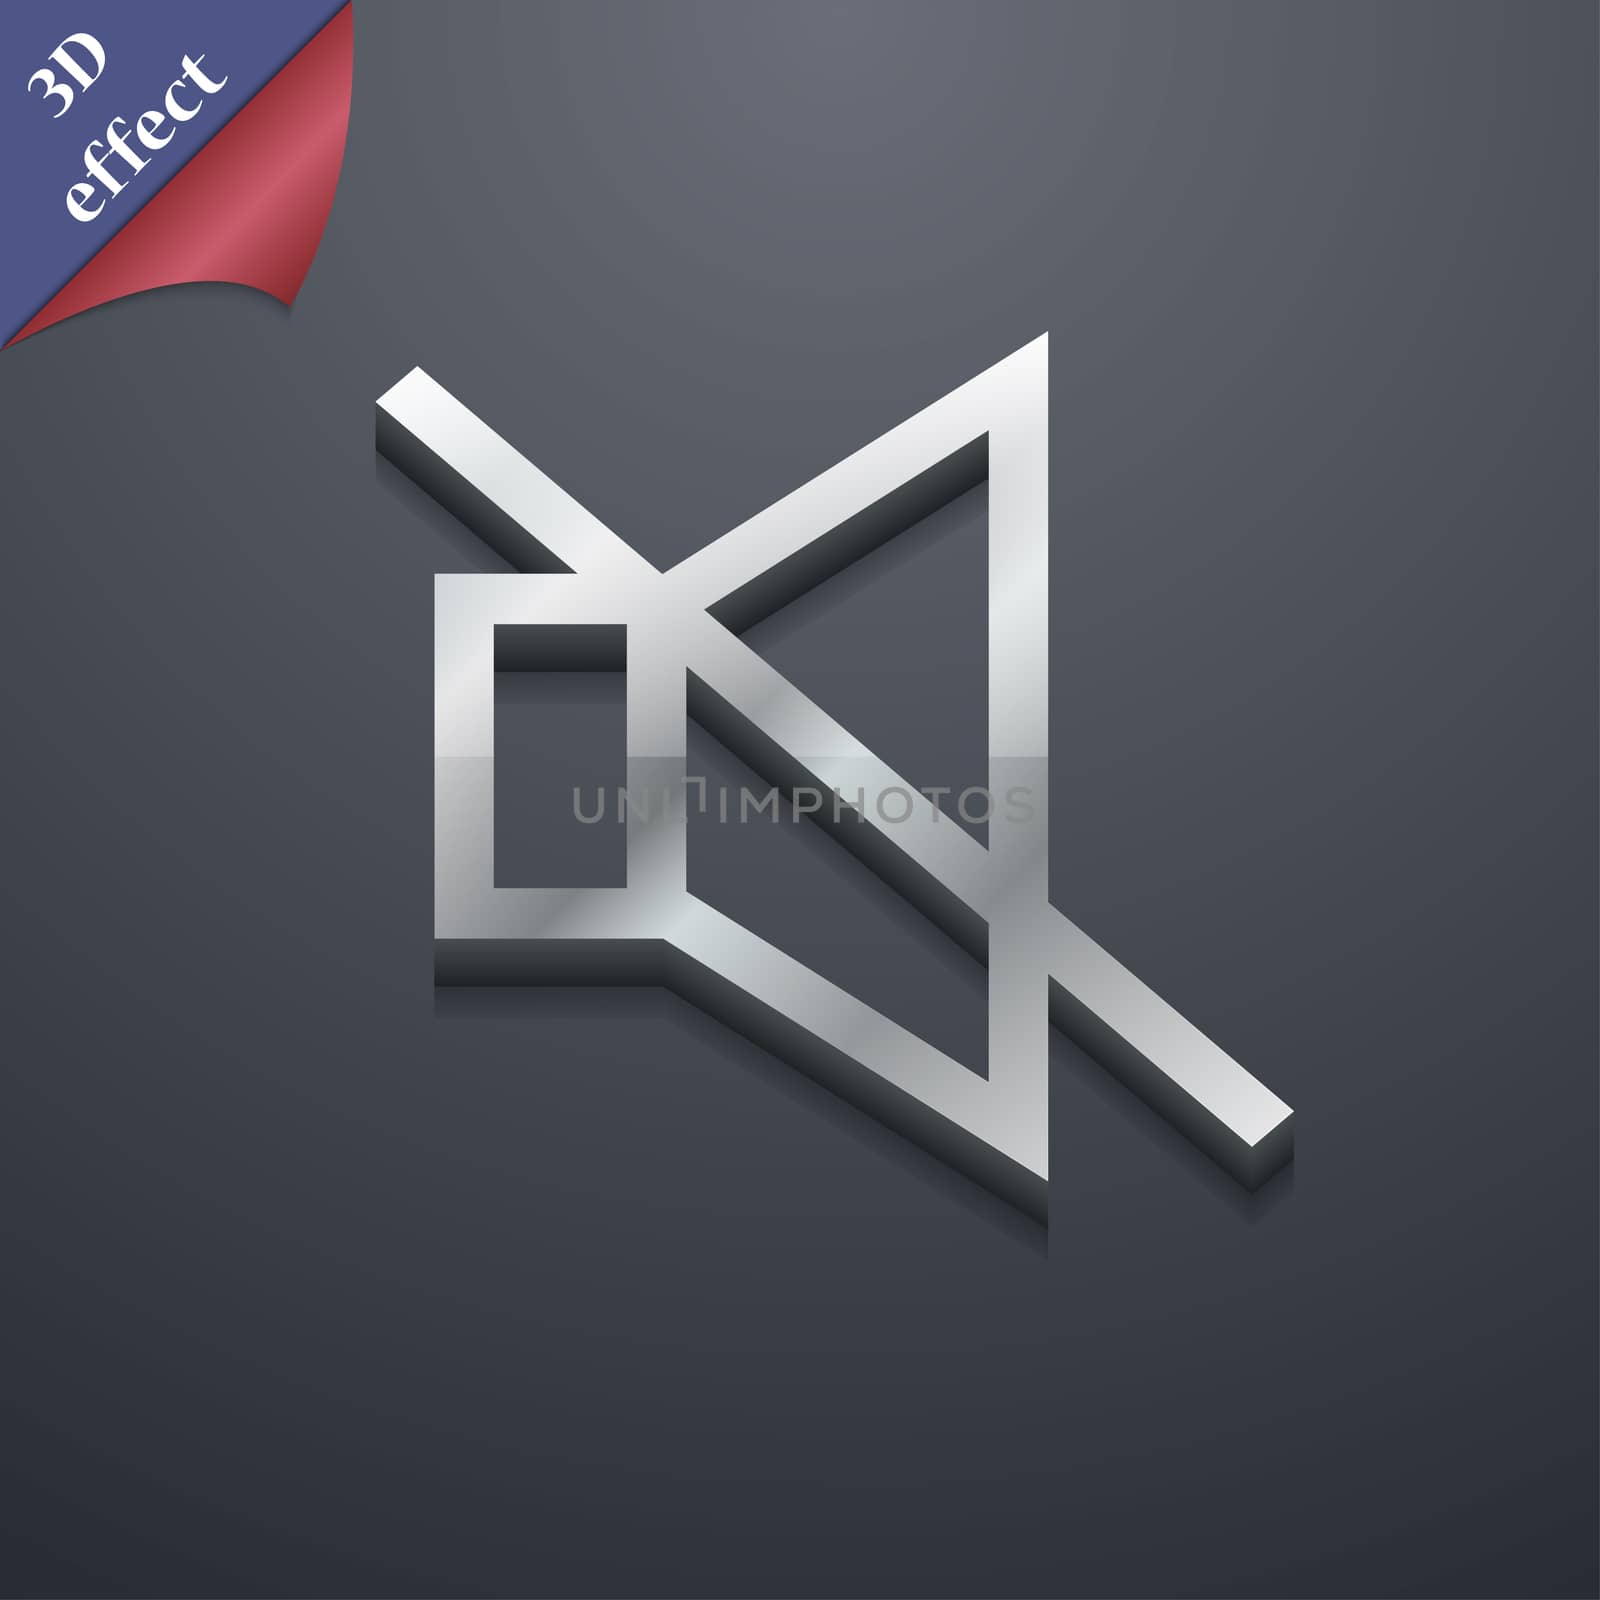 without sound, mute icon symbol. 3D style. Trendy, modern design with space for your text illustration. Rastrized copy